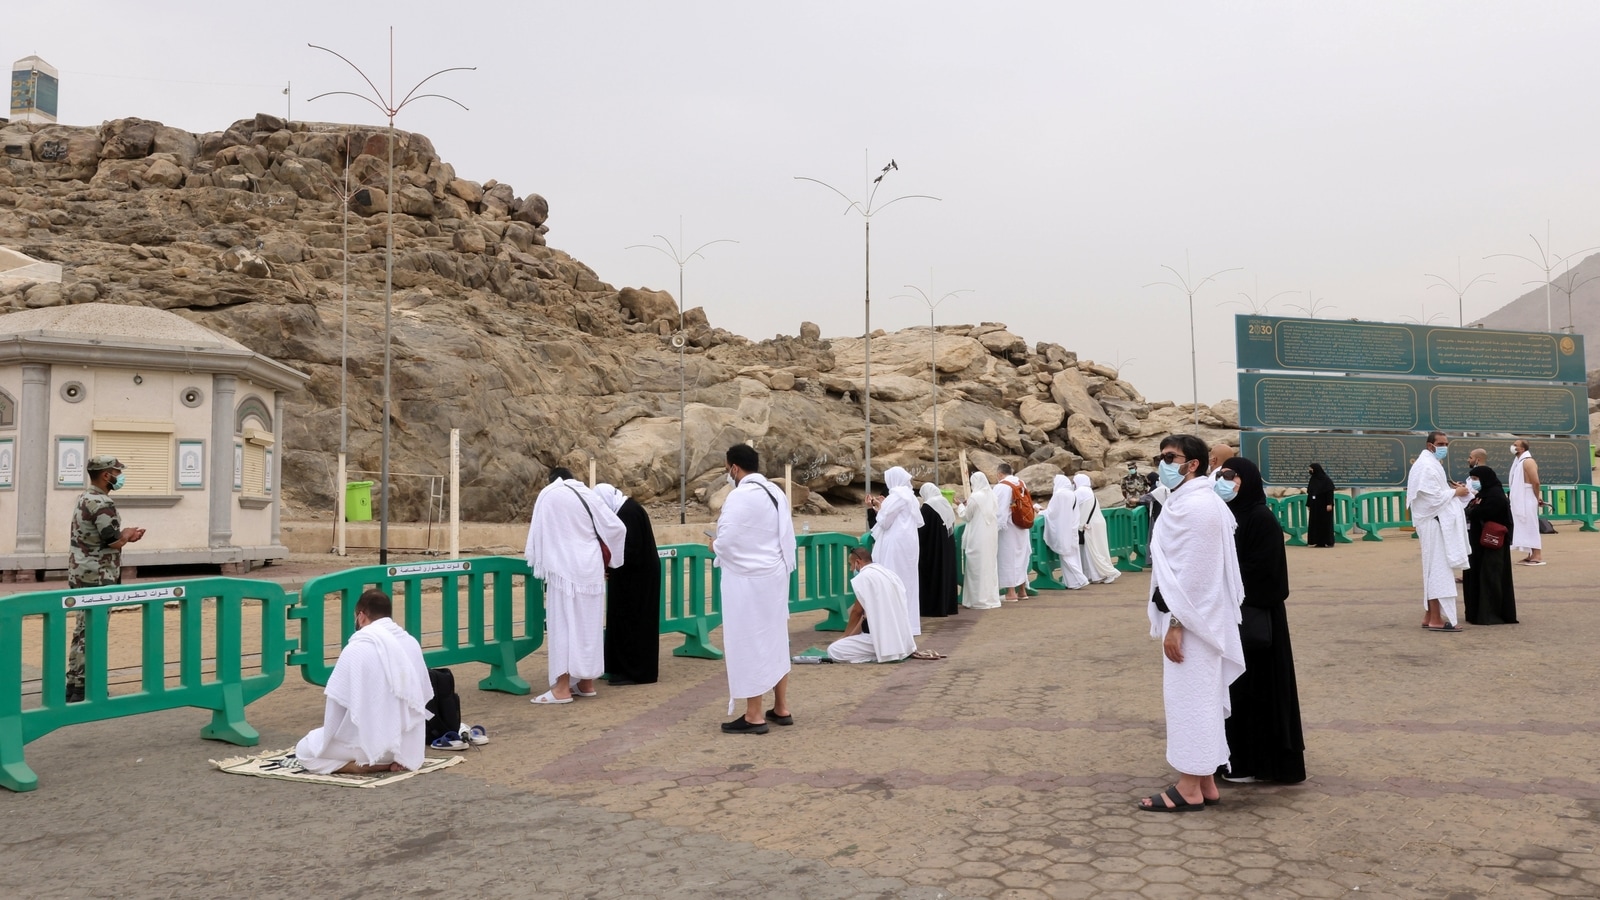 Pilgrims ascend Mount Arafat near Mecca in high point of pandemicera